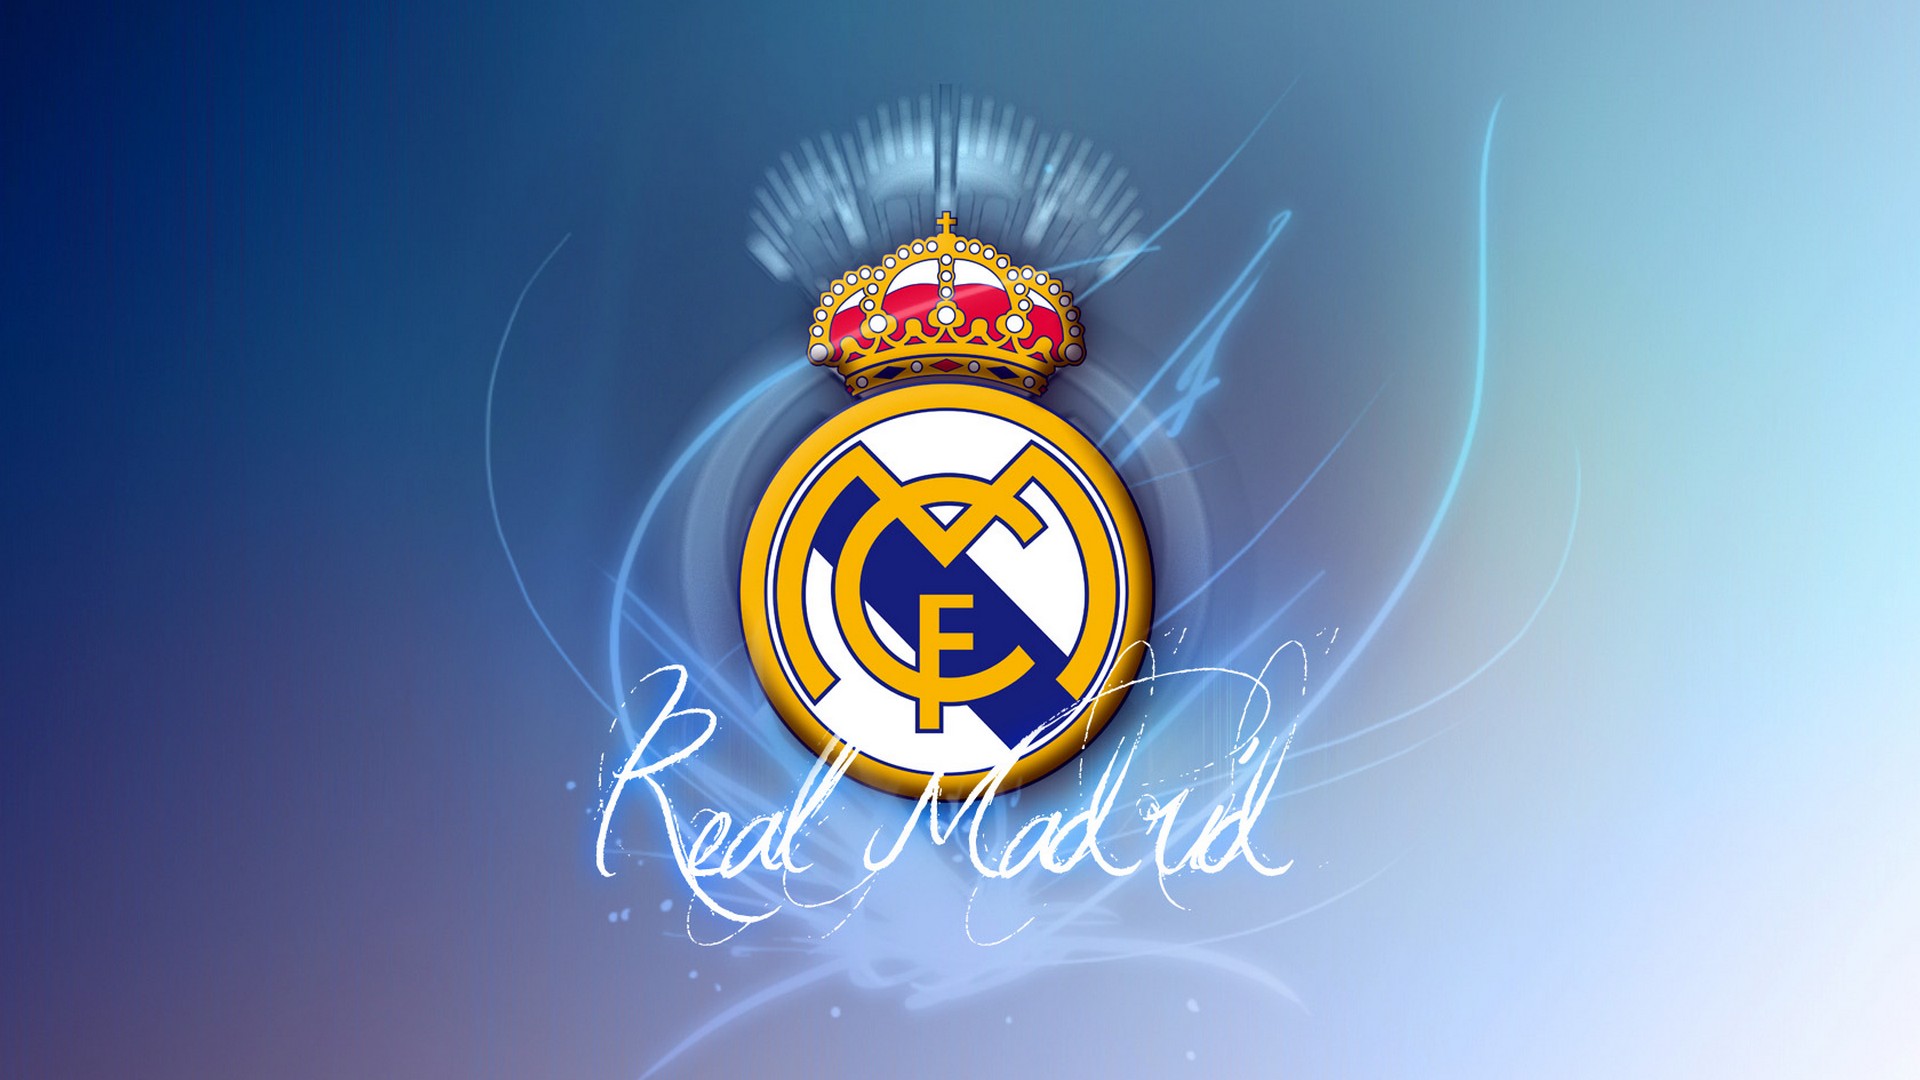 Hd Real Madrid Backgrounds With Resolution Pixel - Hd Real Madrid Logo - HD Wallpaper 